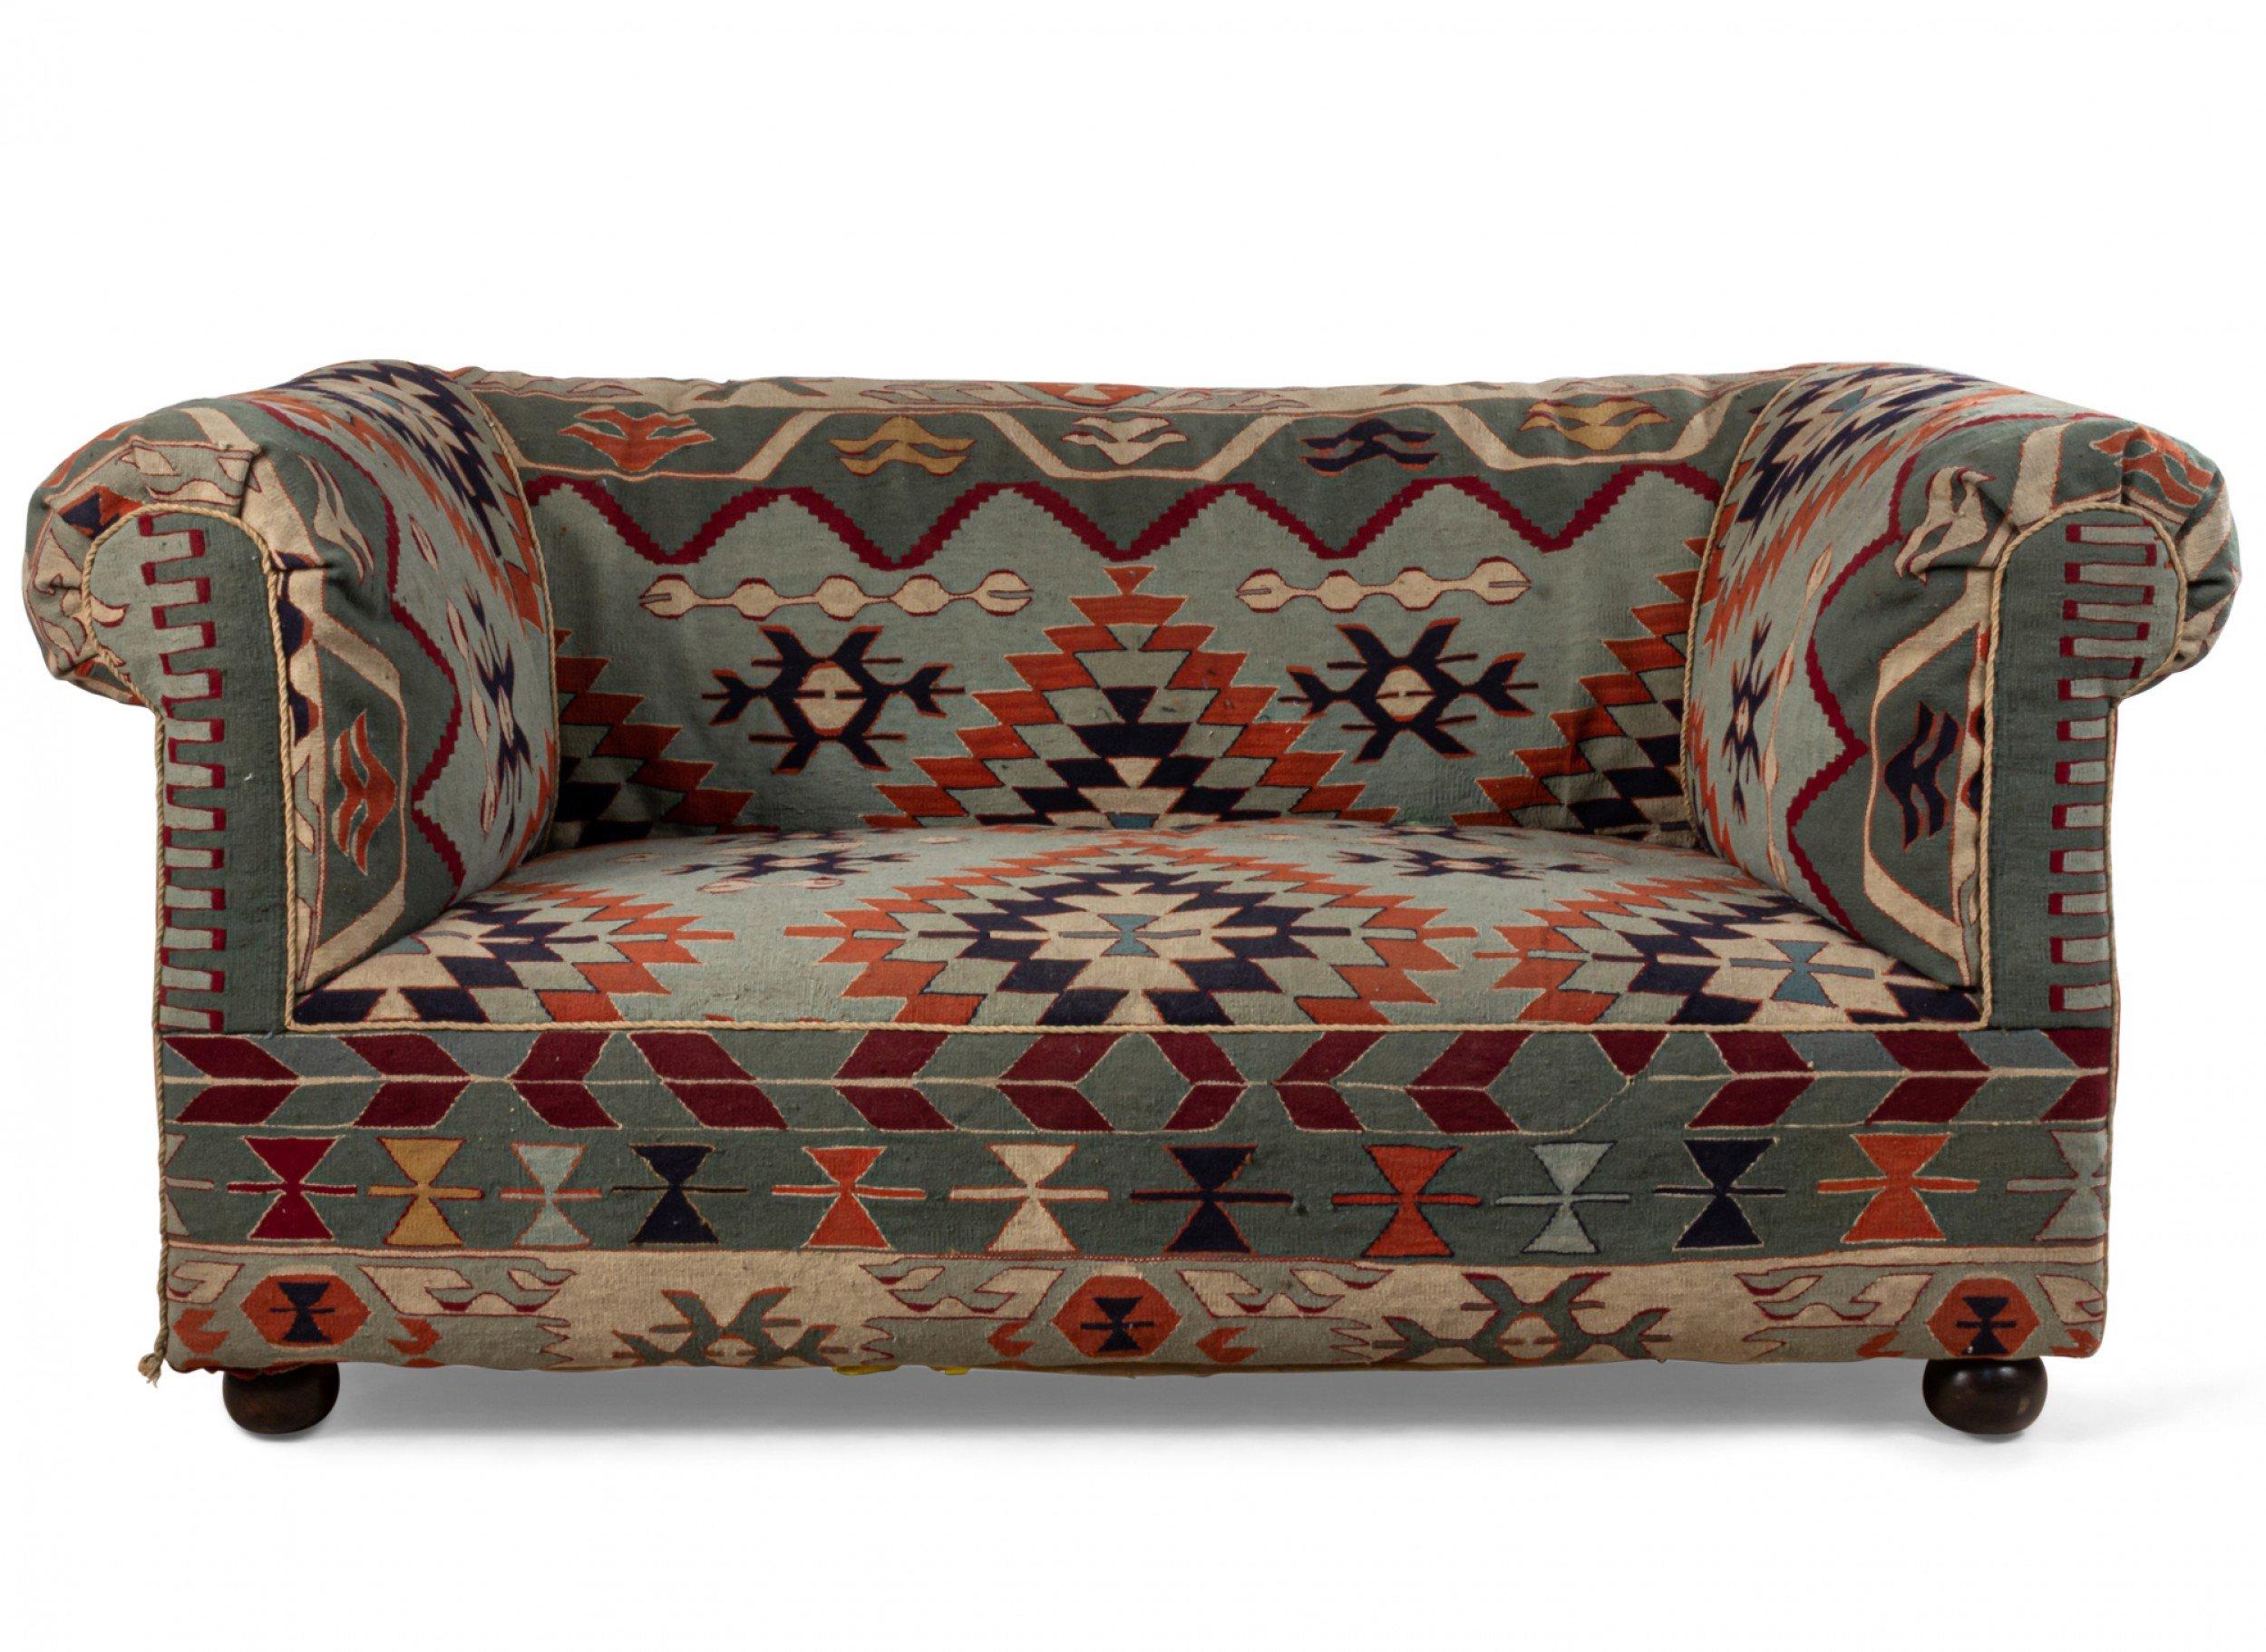 2 English Victorian style (20th century) roll arm and back loveseats with Turkish kilim upholstery (Priced each).